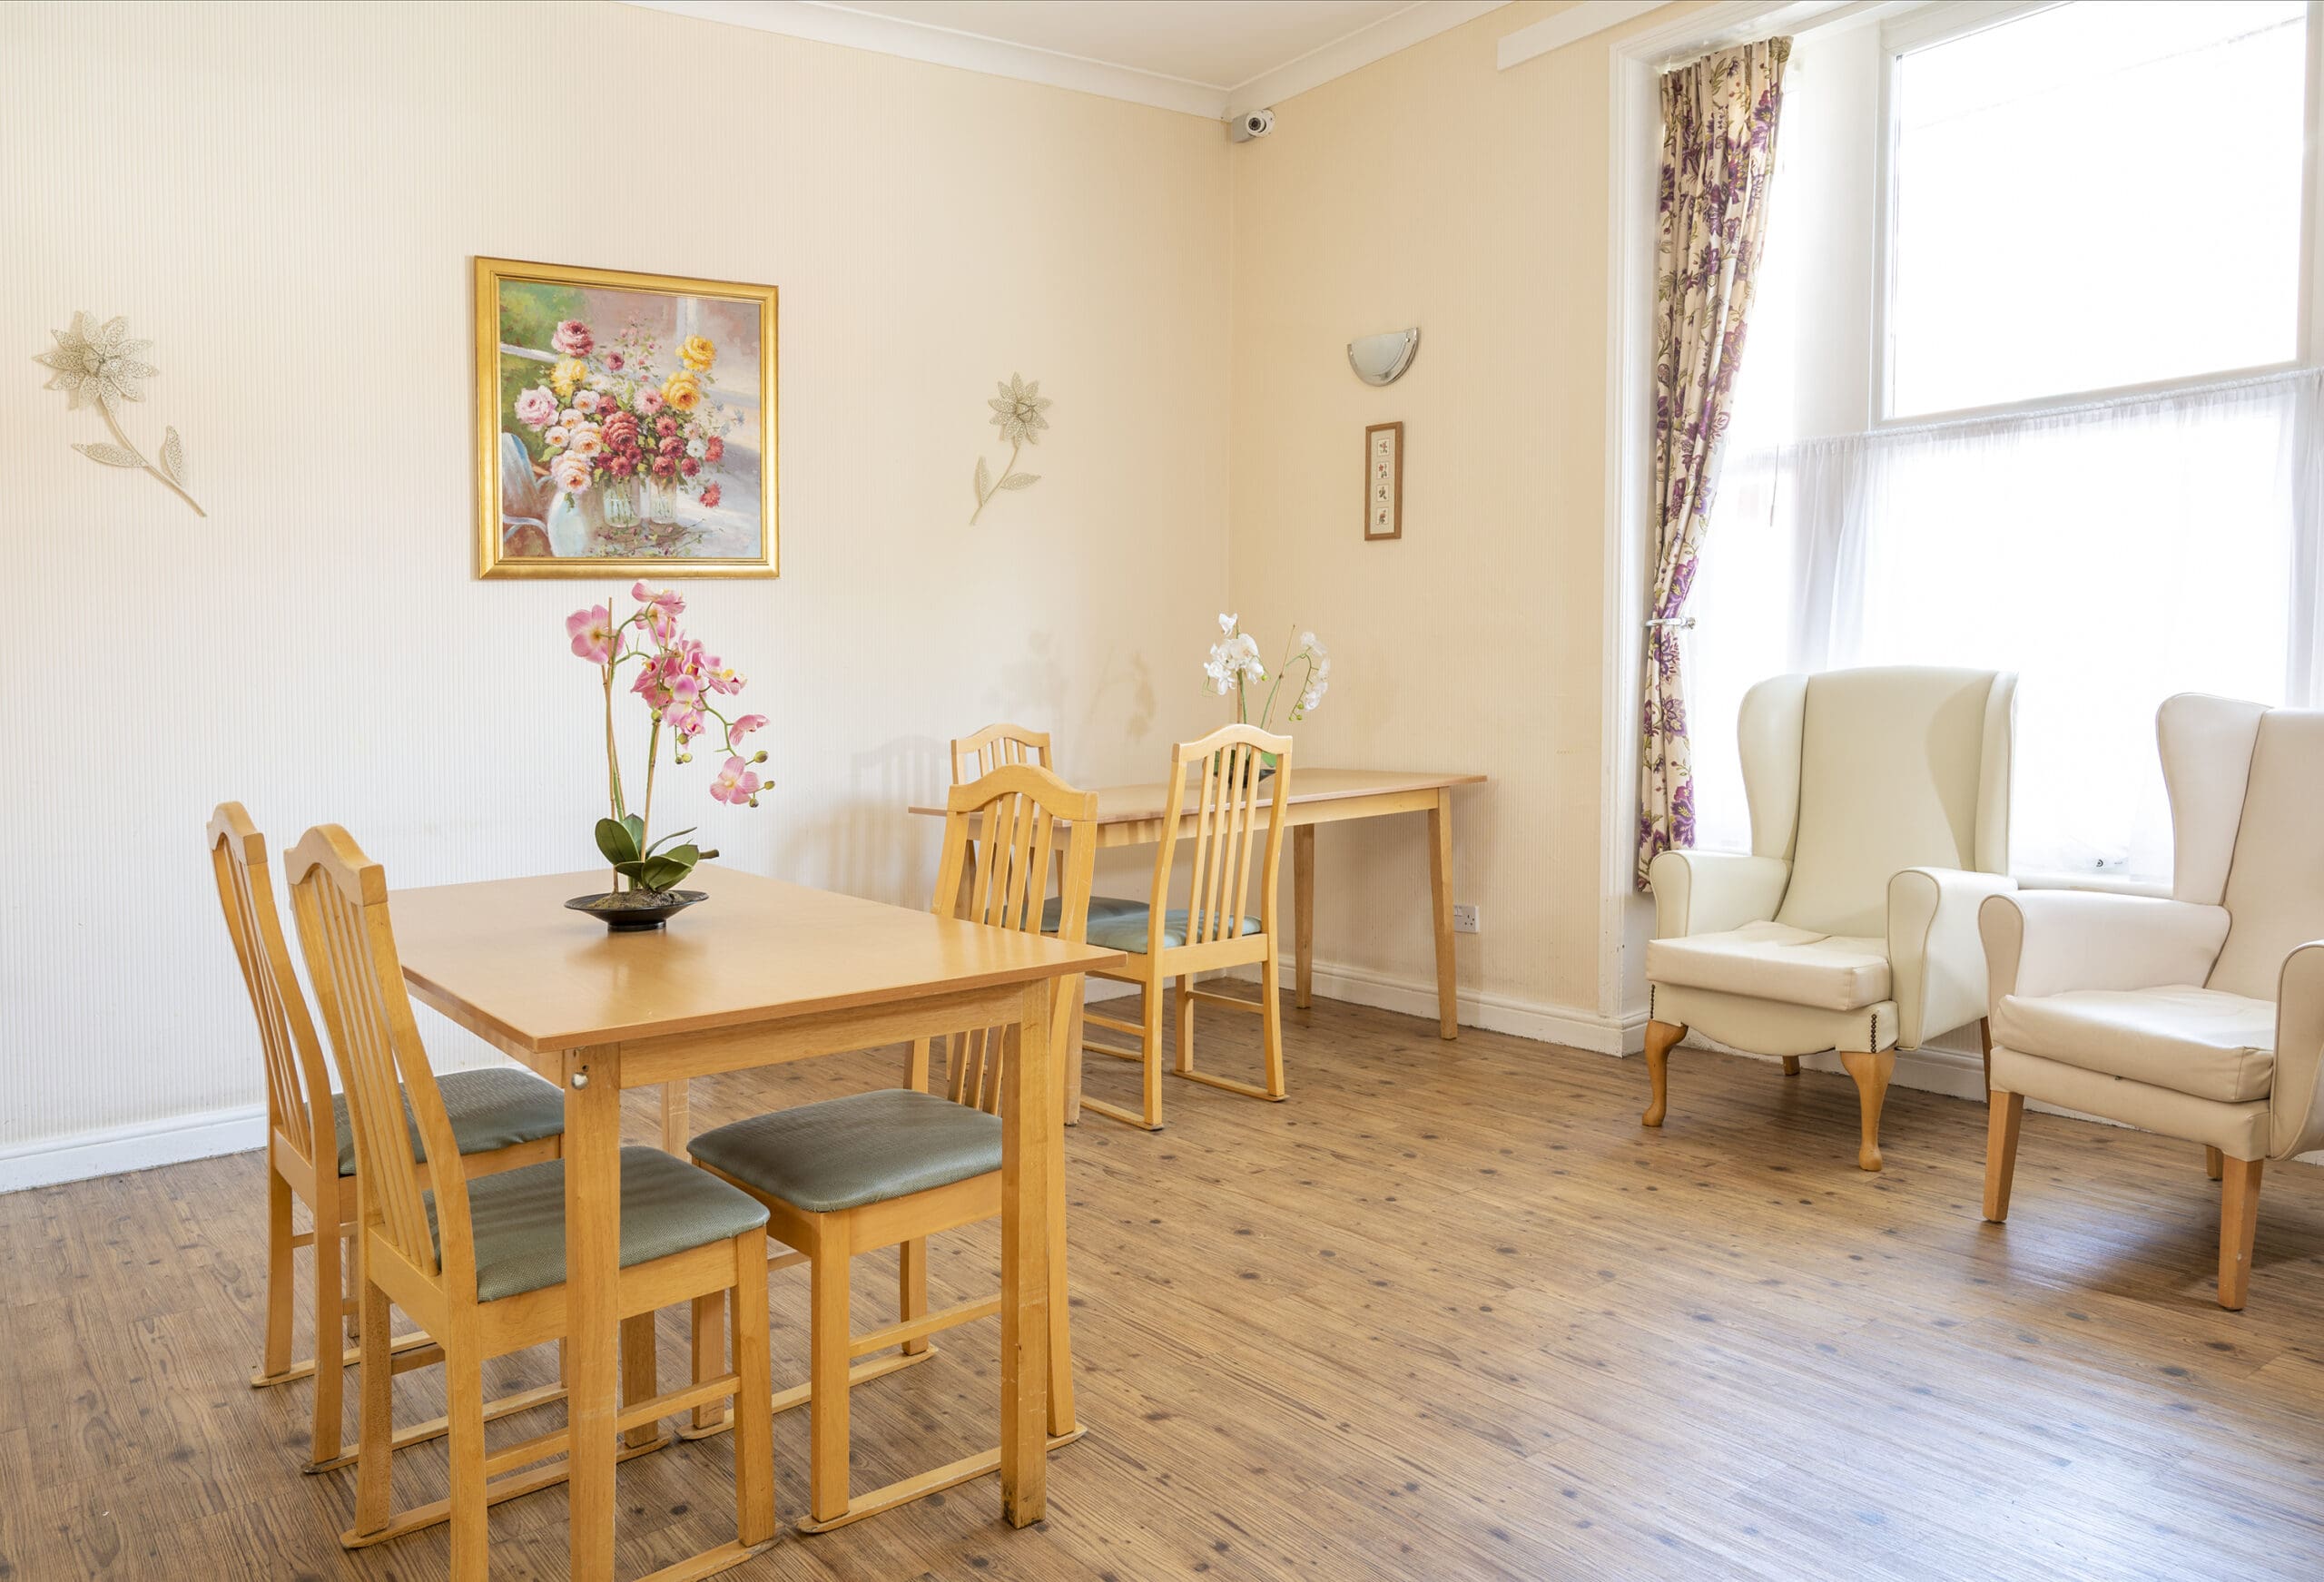 The dining area at Gabriel Court